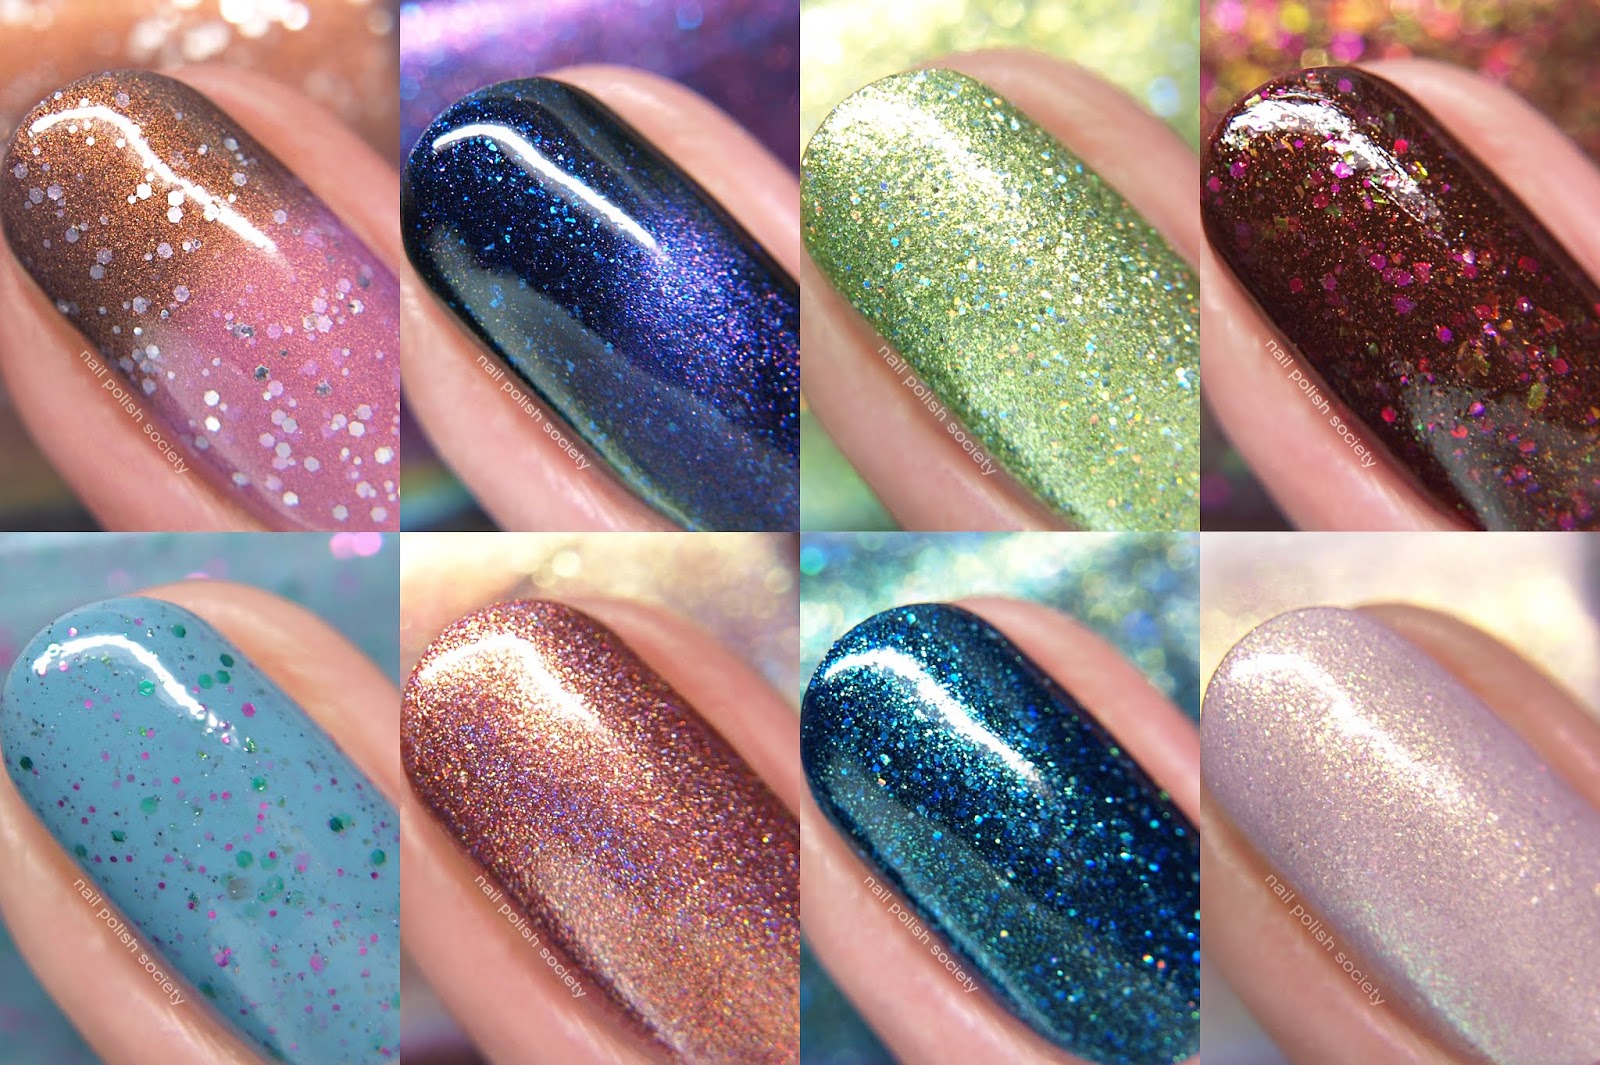 6. Emily de Molly Multichrome Nail Polish - Color Shifting Finishes - wide 7